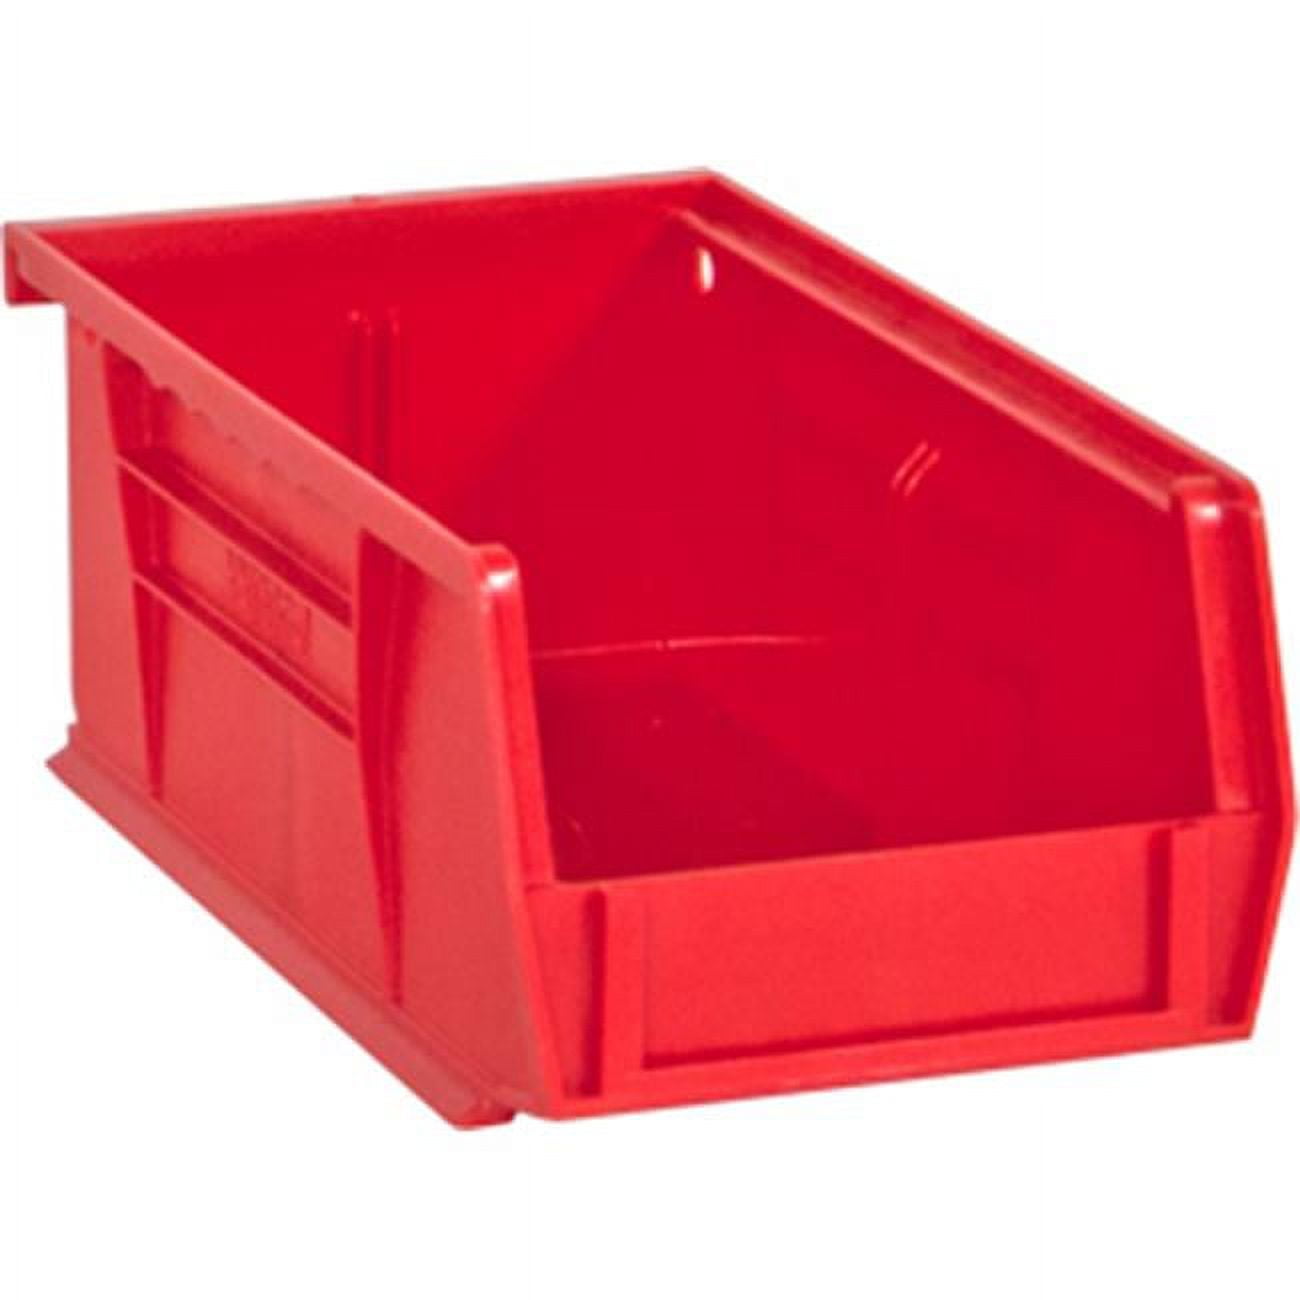 Picture of Durham PB30220-17 3 in. Plastic Bin, Red - 10 lbs